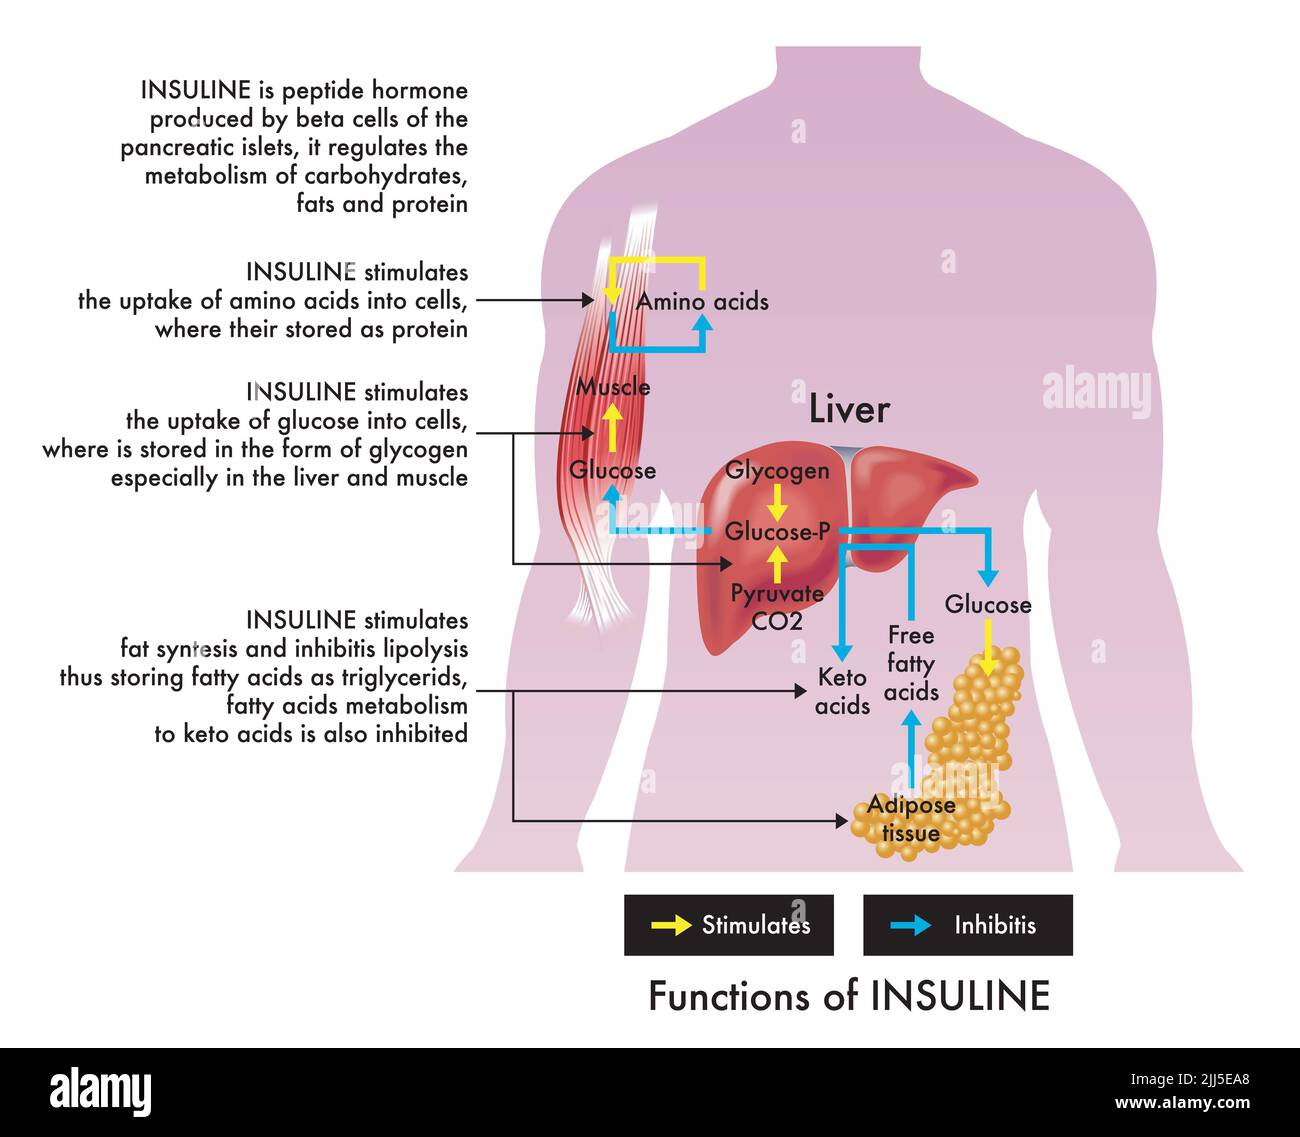 Medical illustration of insuline functions, with annotations. Stock Photo